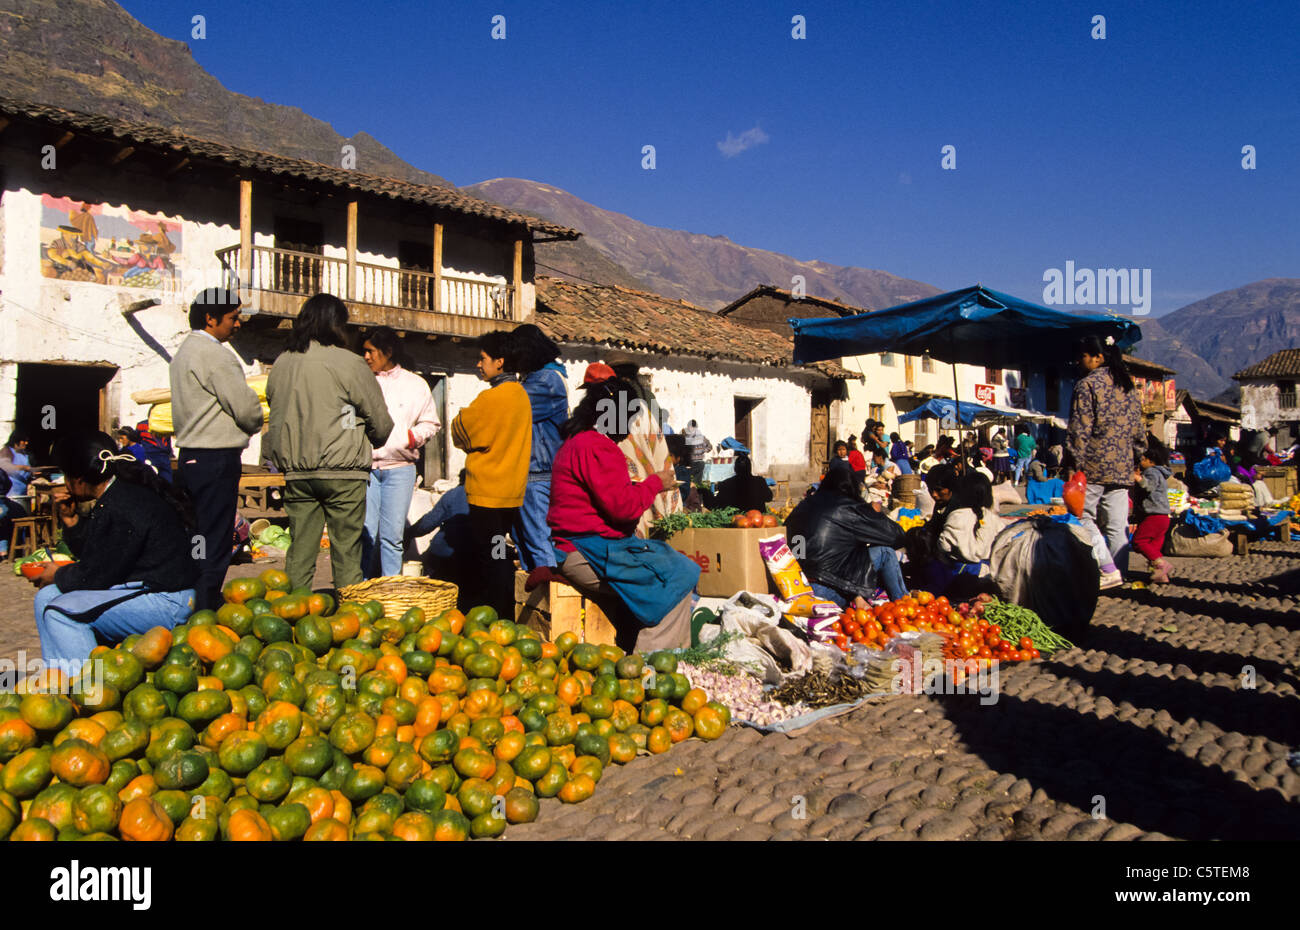 Oranges for sale at the weekend marked in Pisac town, Peru. People on the square. Stock Photo